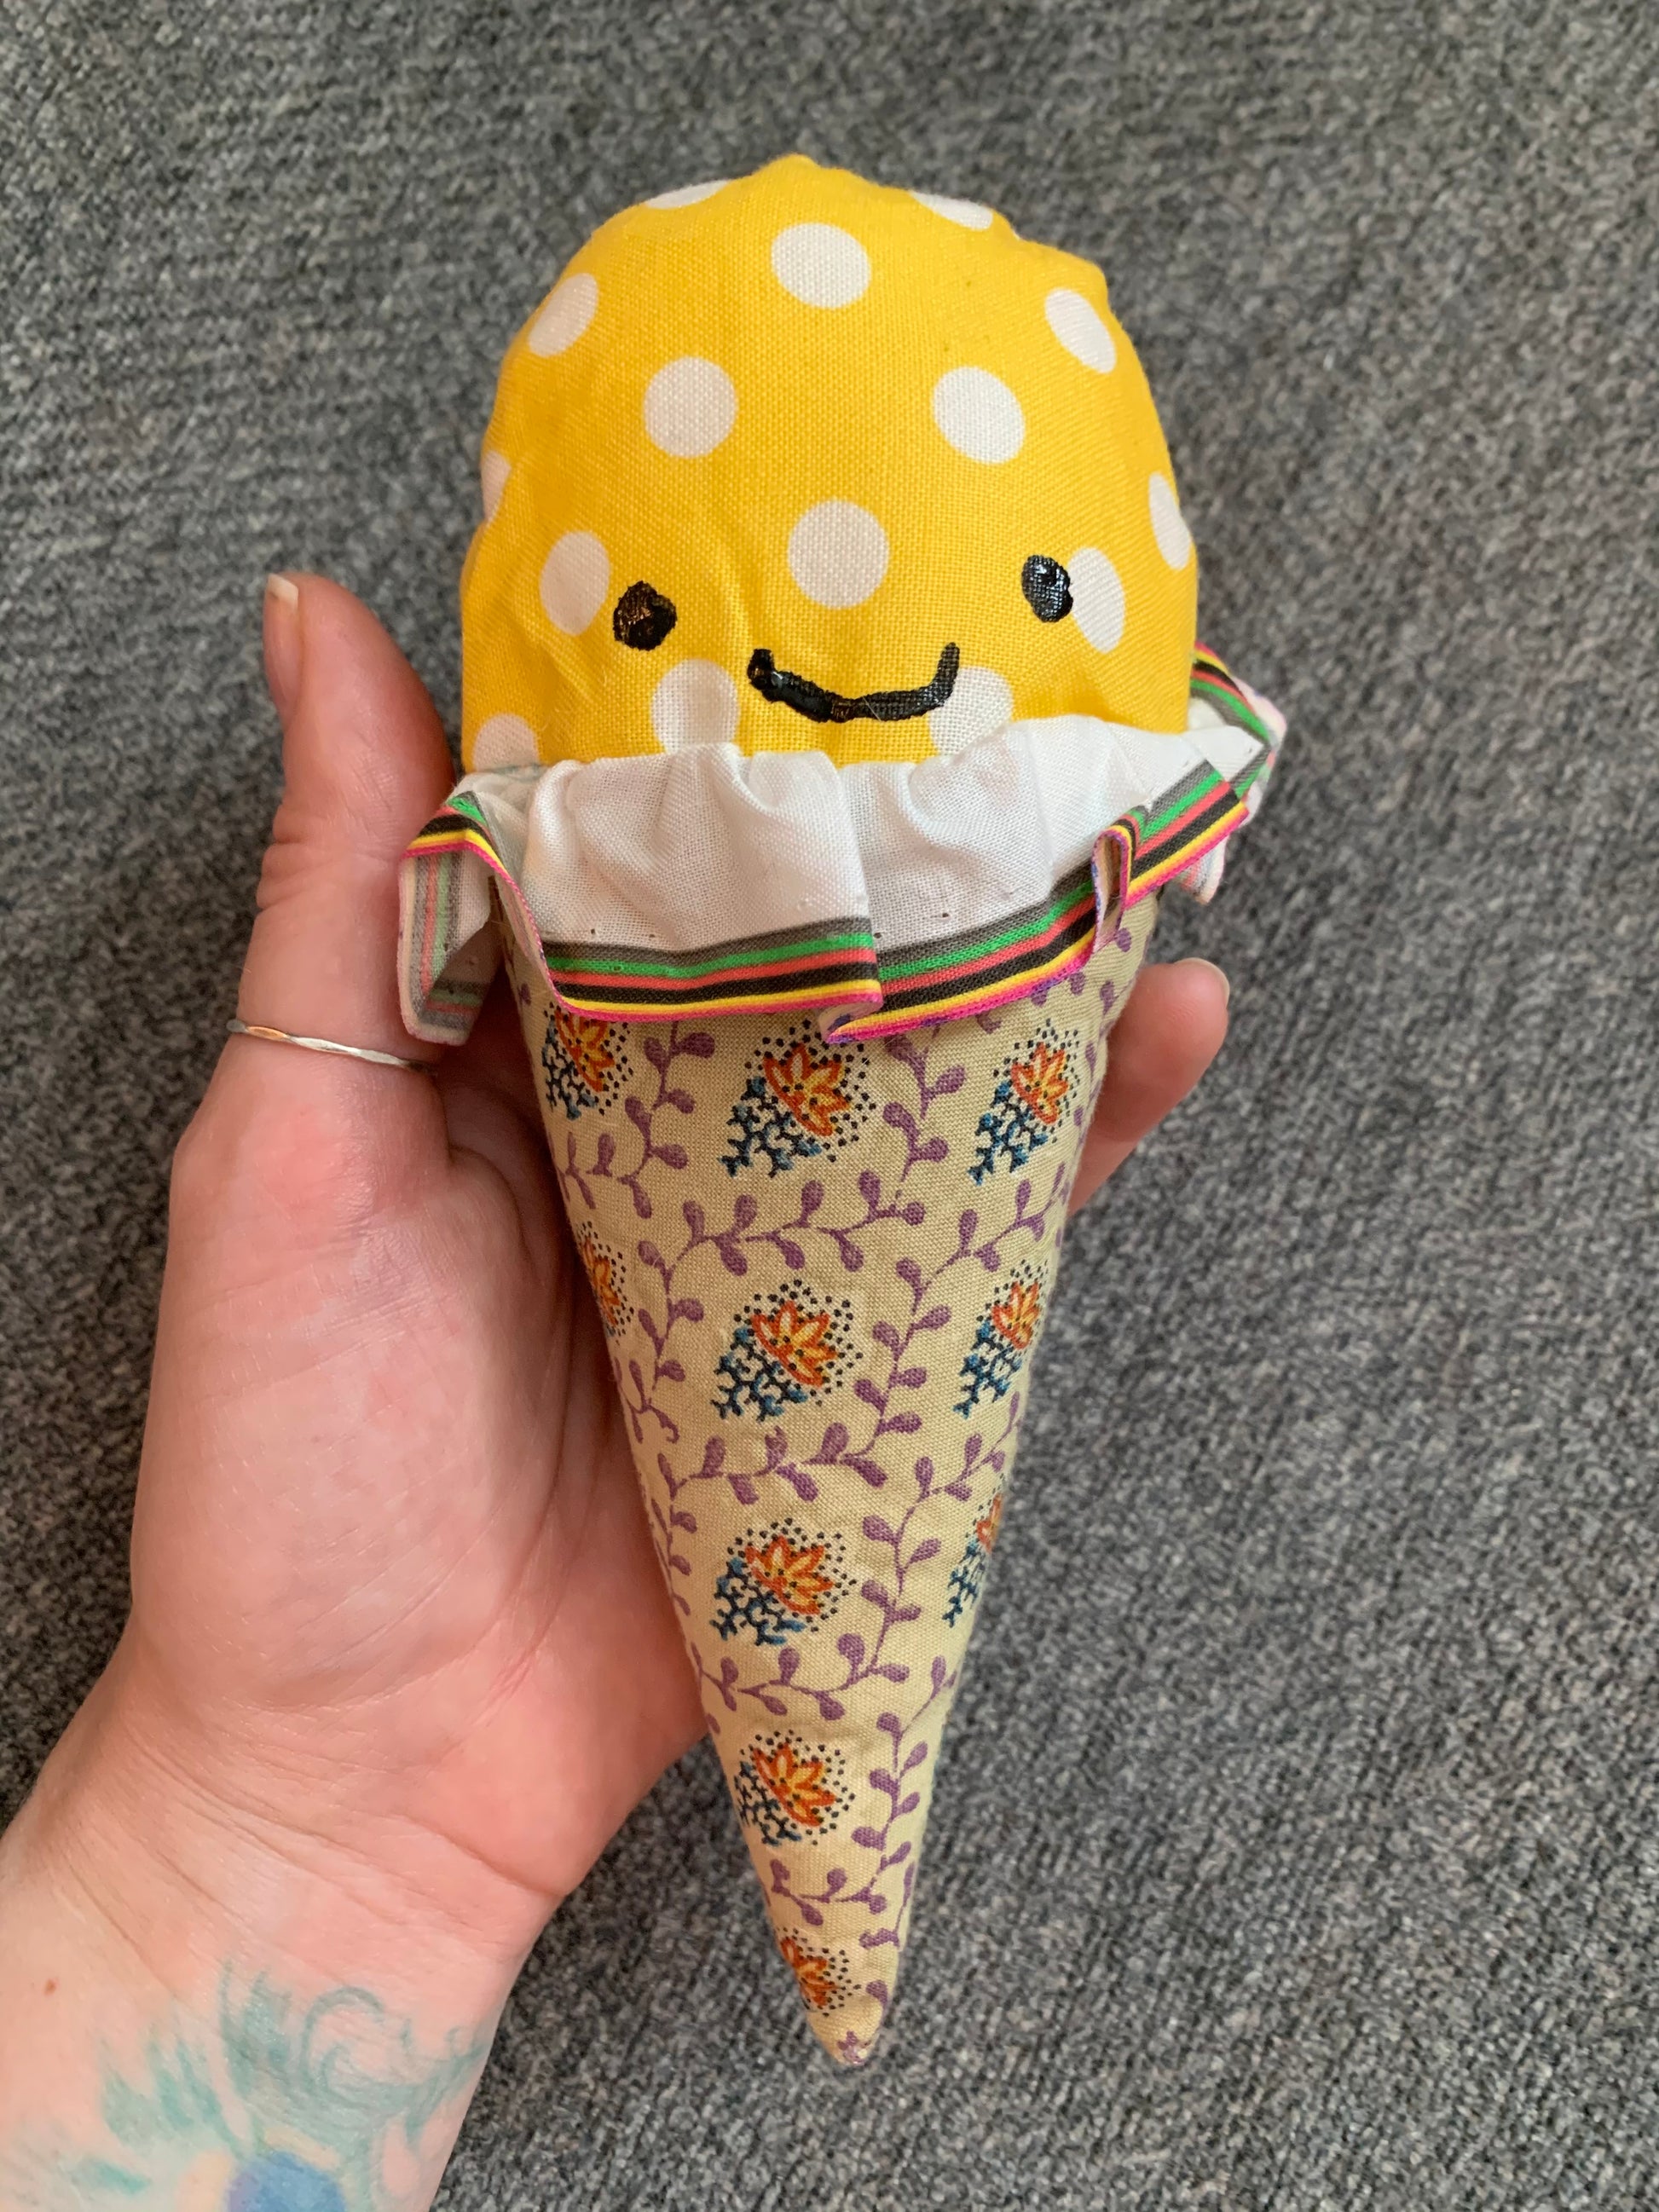 a yellow polkadot ice cream cone with khaki and yellow floral cone, held up against a grey background, hand for scale